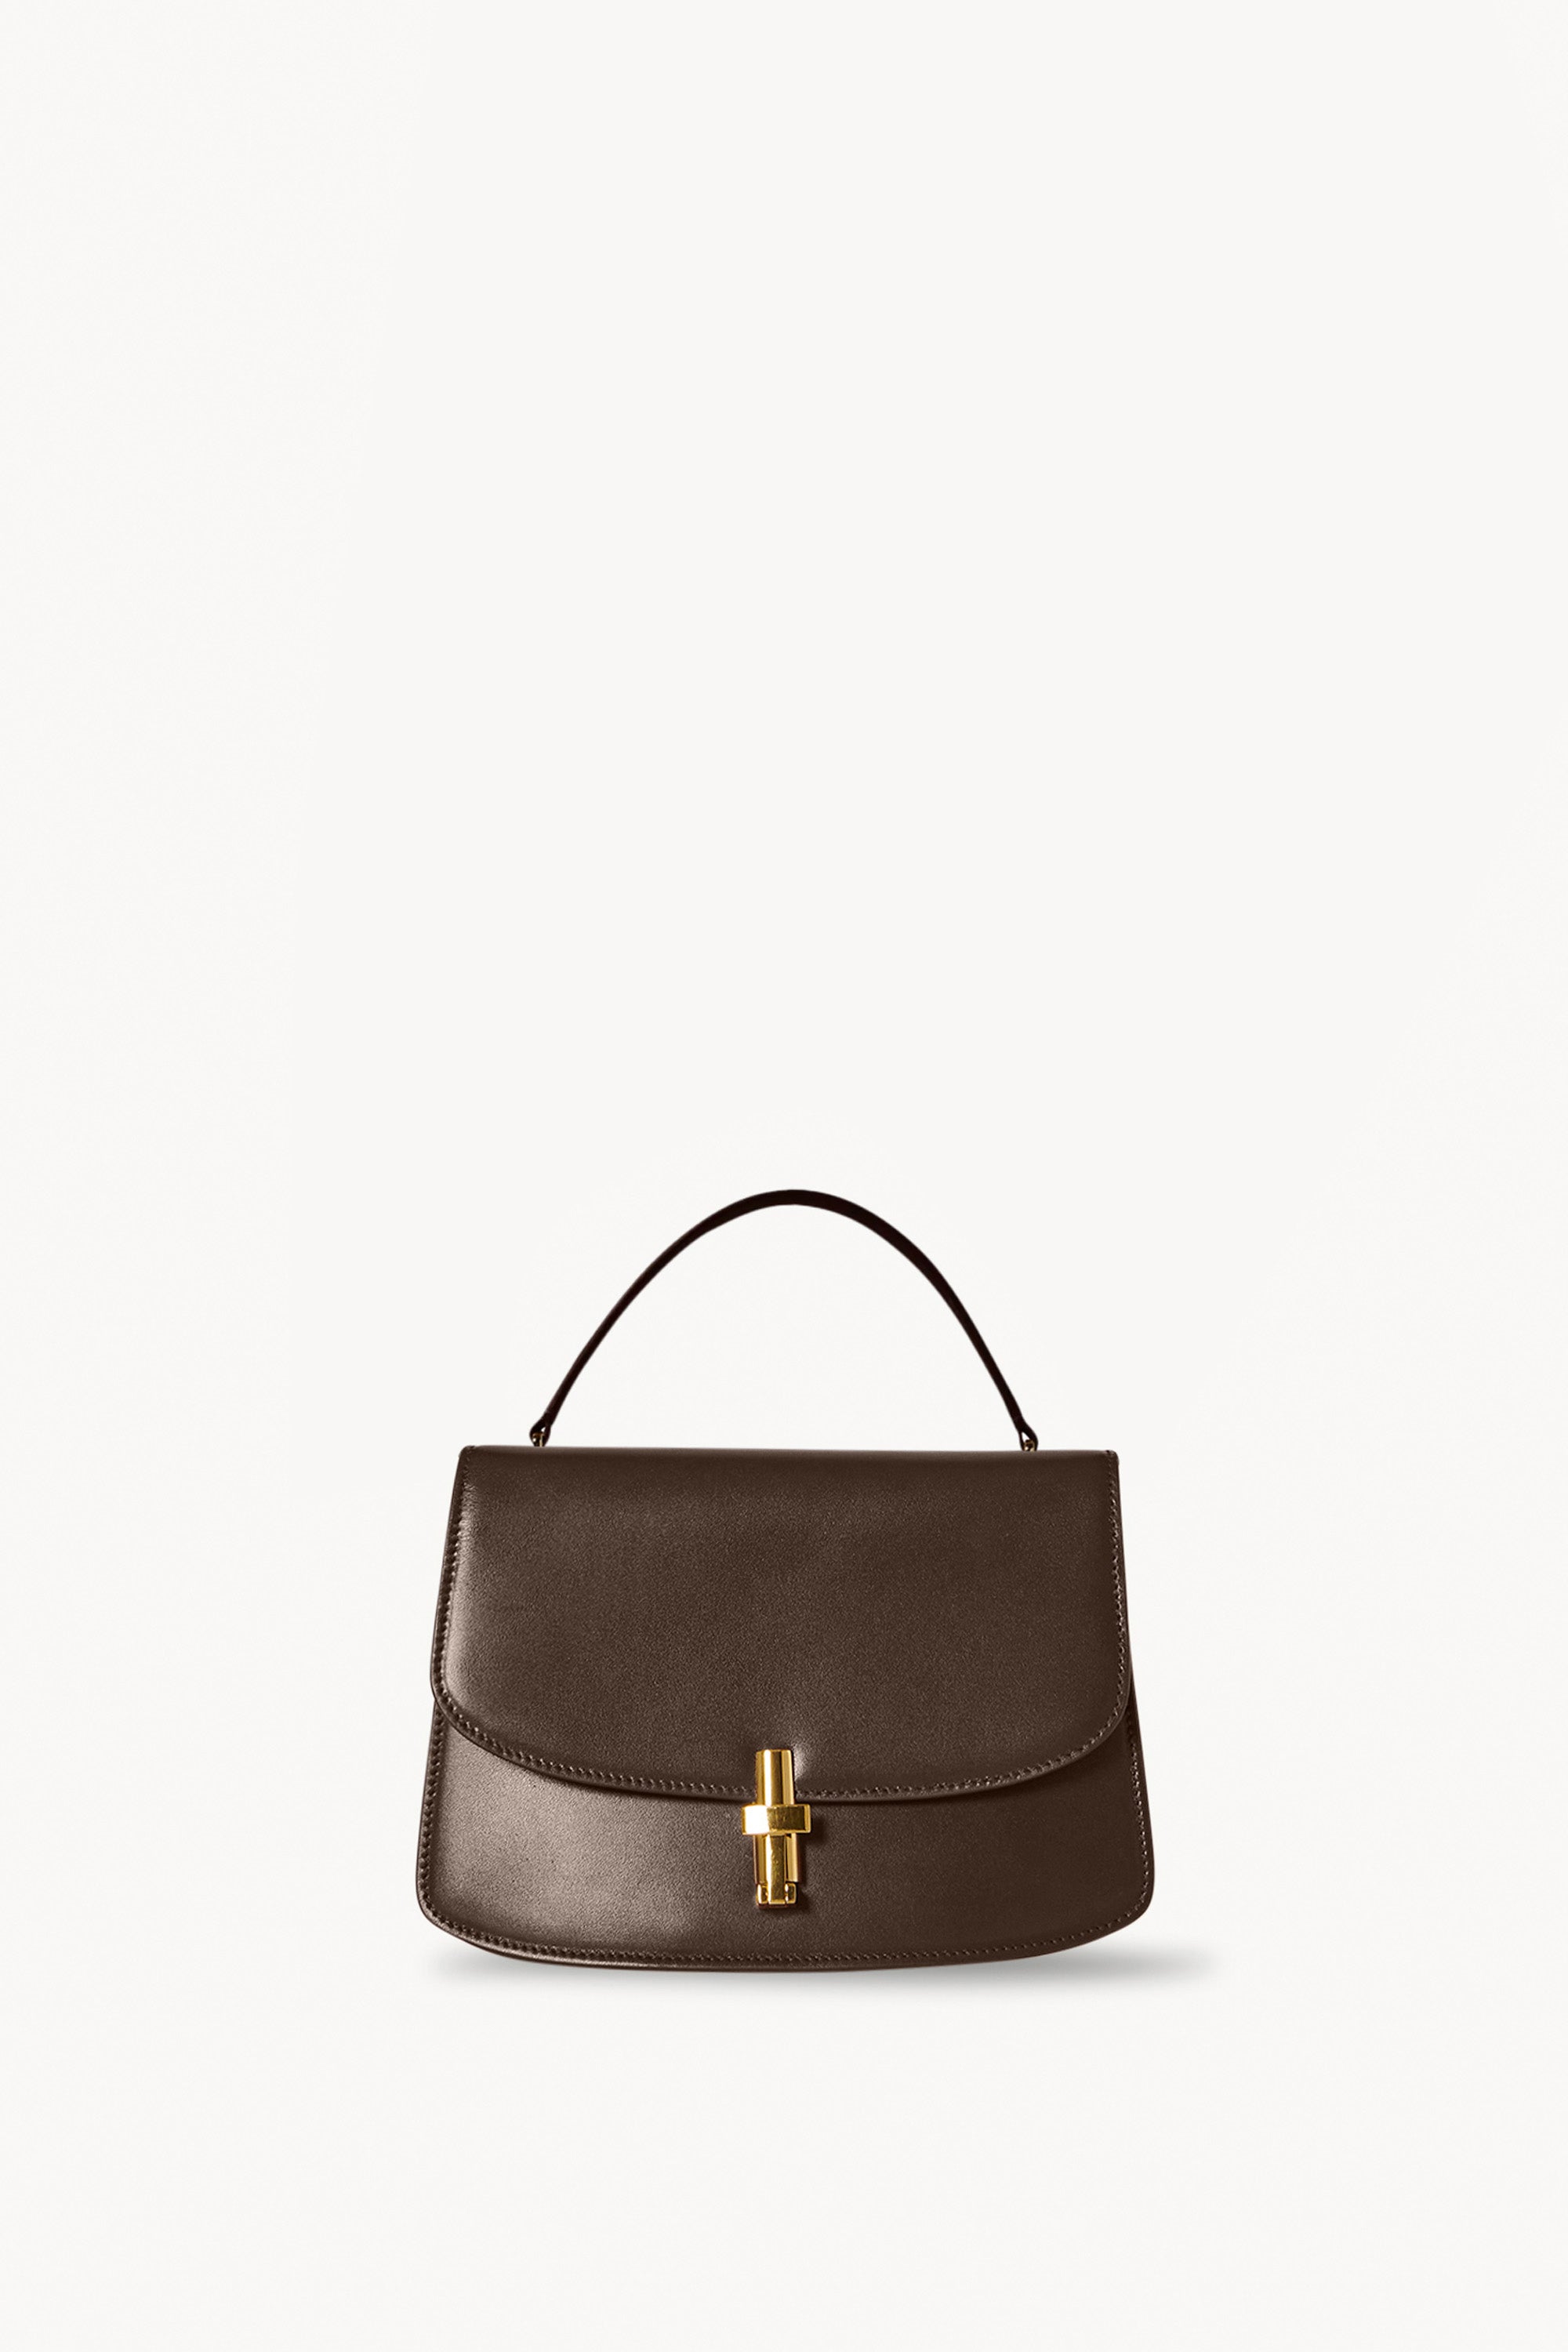 Women's Top Handle Bags: Leather & Suede Handbags l The Row